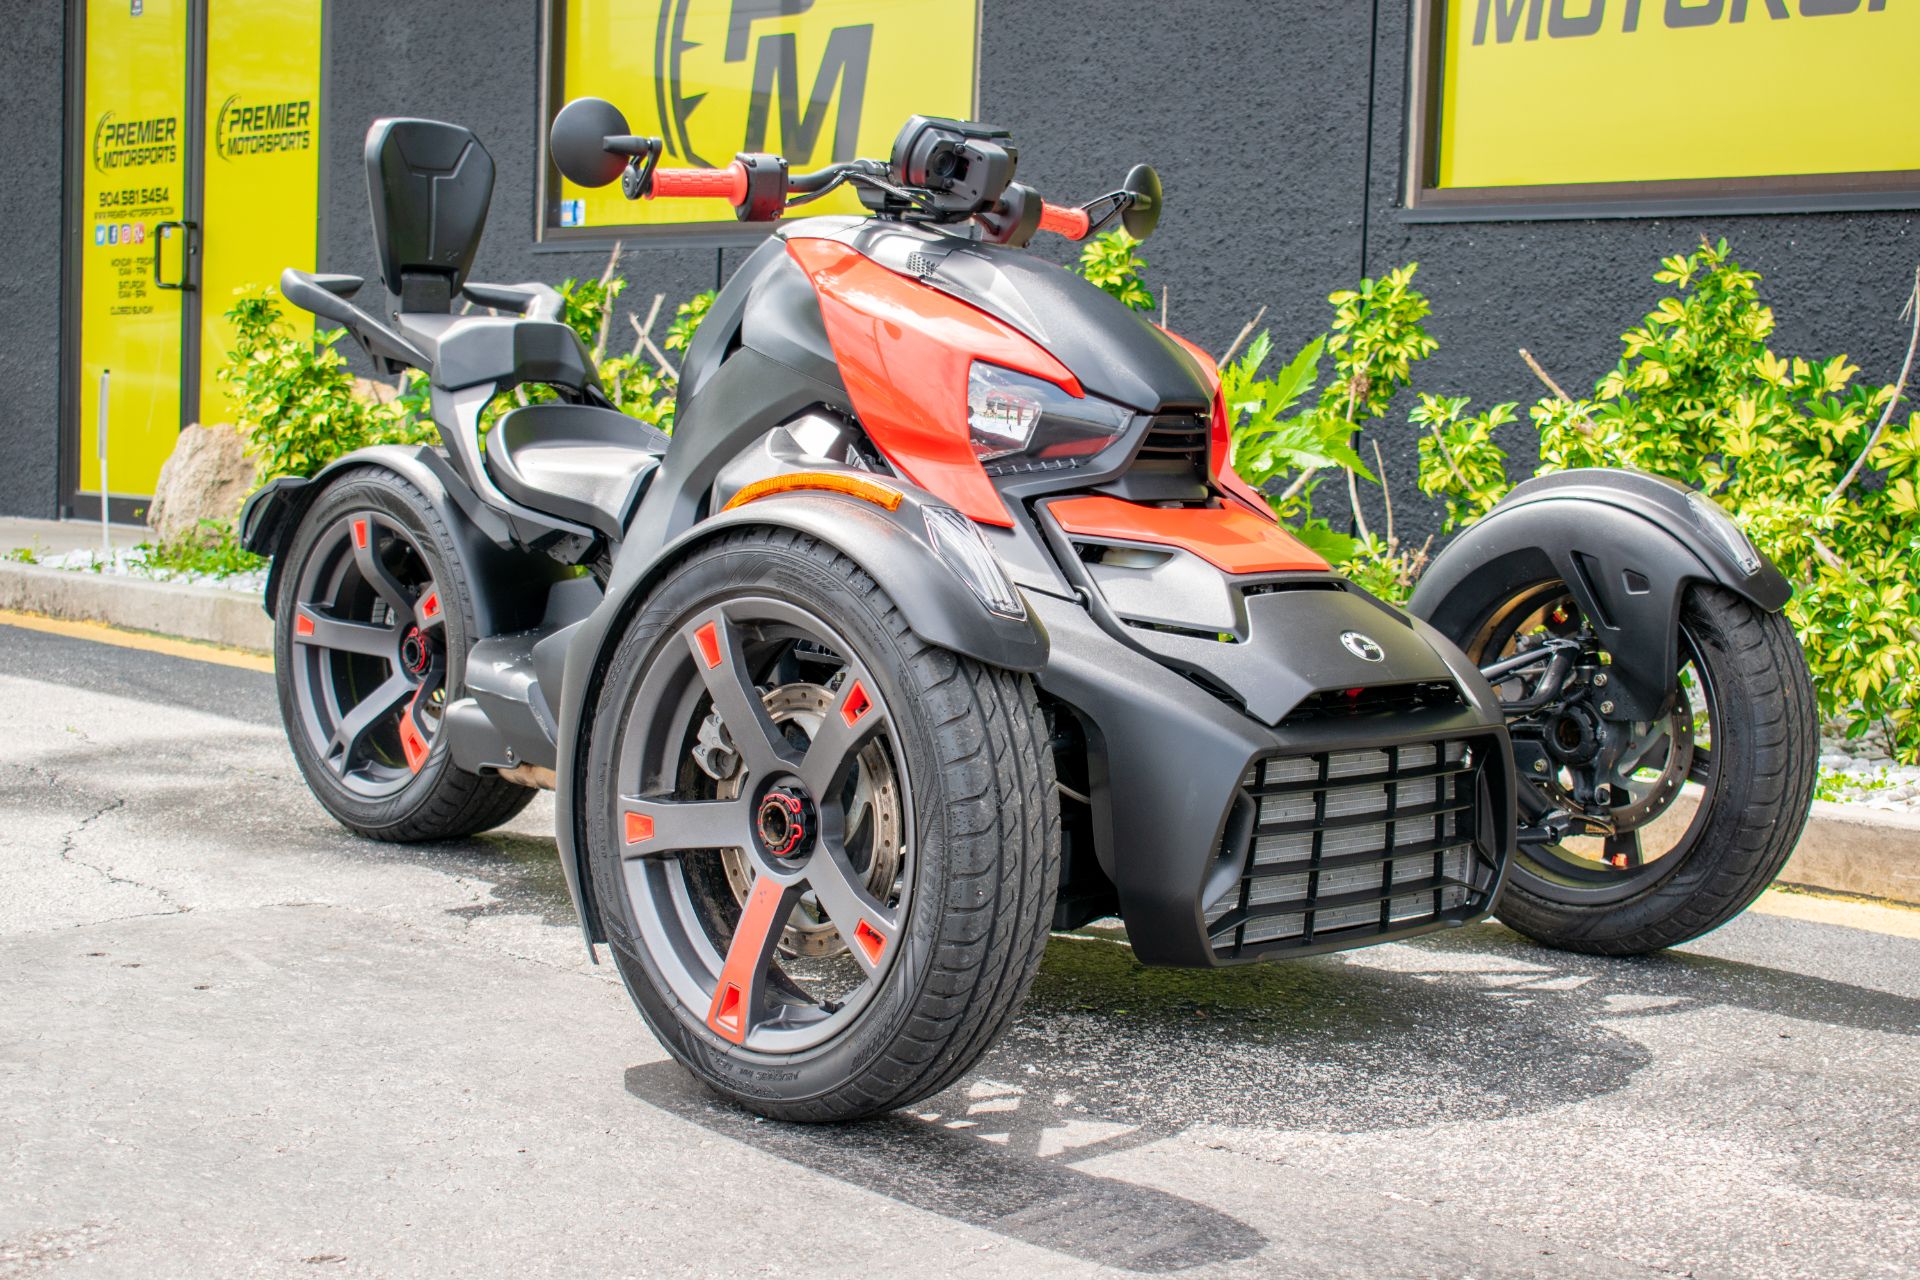 2020 Can-Am Ryker 900 ACE in Jacksonville, Florida - Photo 5